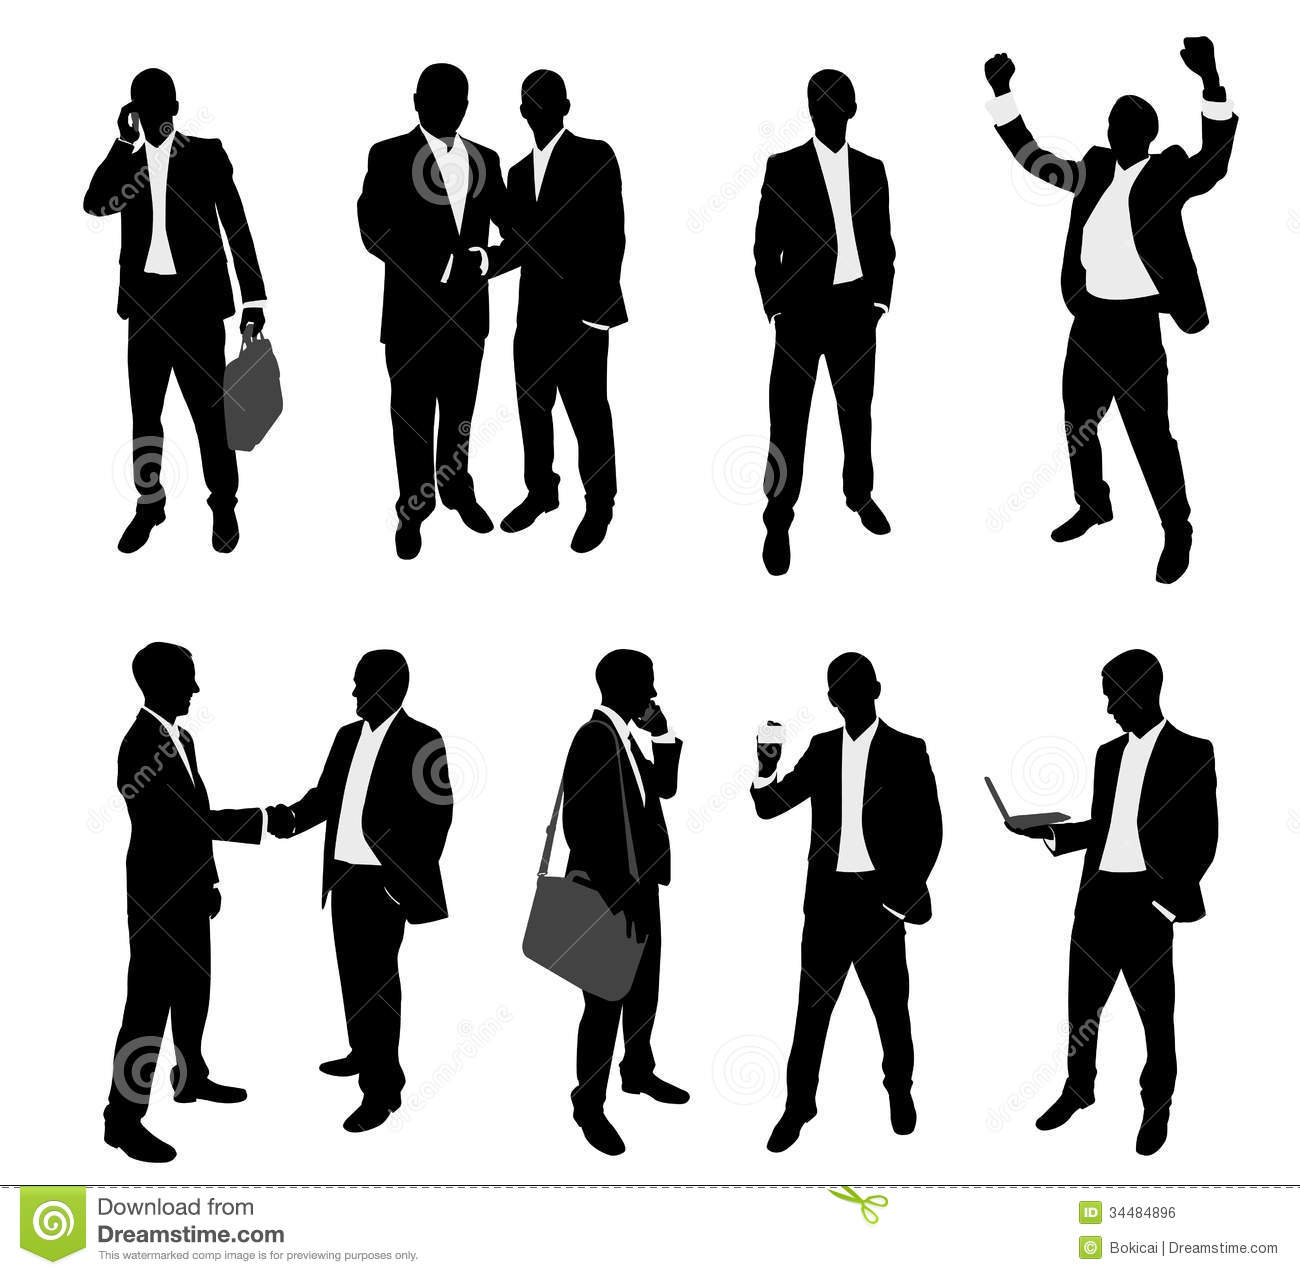 Business People Silhouettes Royalty Free Stock Image   Image  34484896